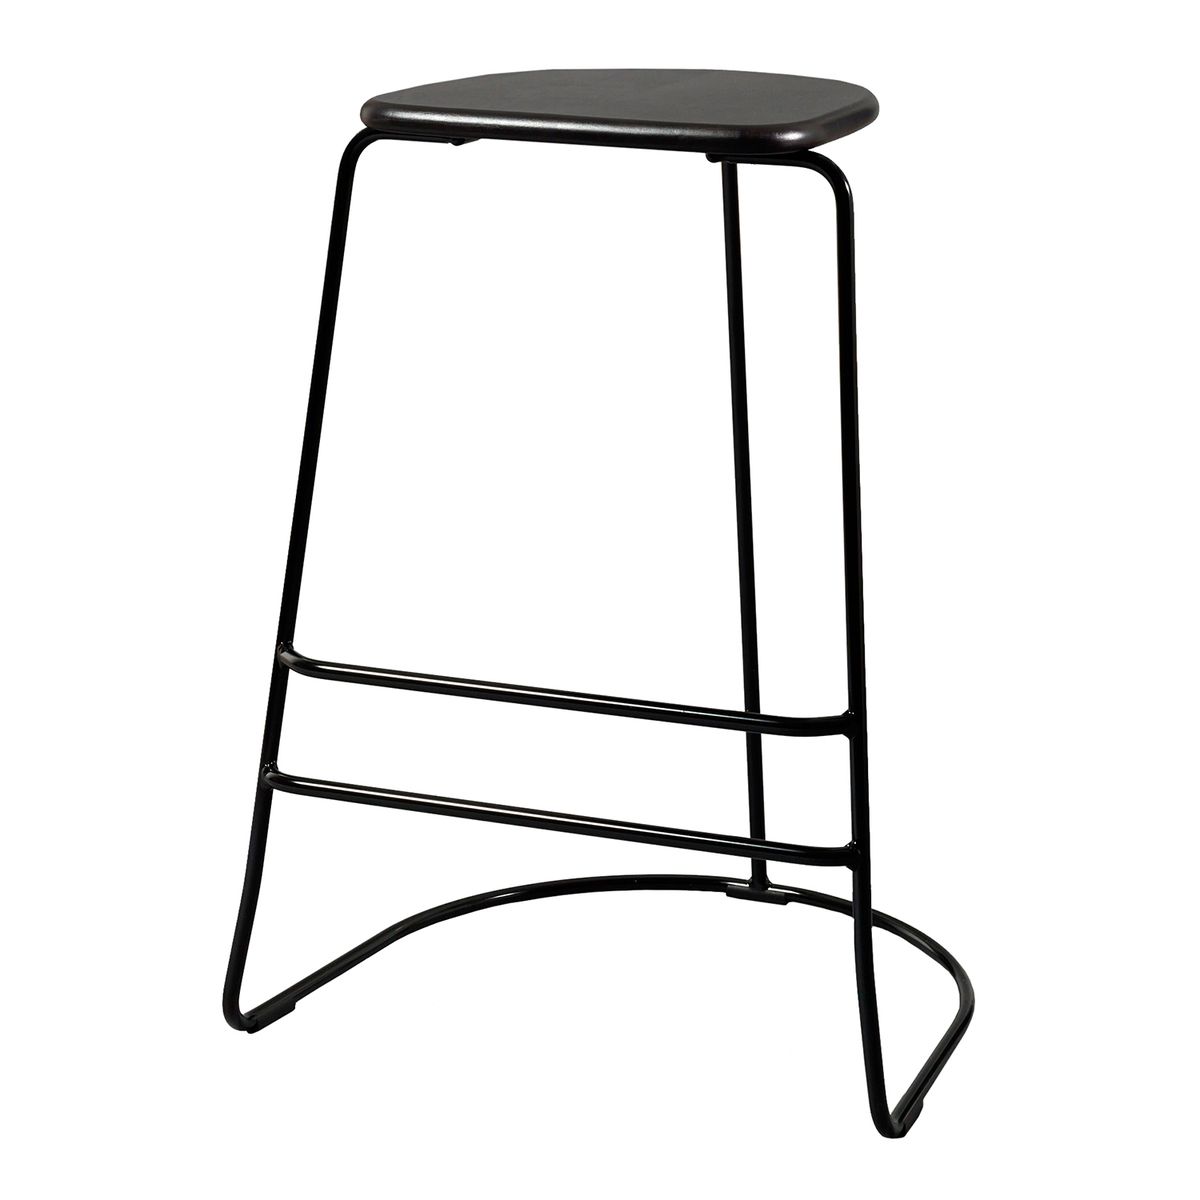 Elevate Your Bar Space with Ghost Chair
Bar Stools